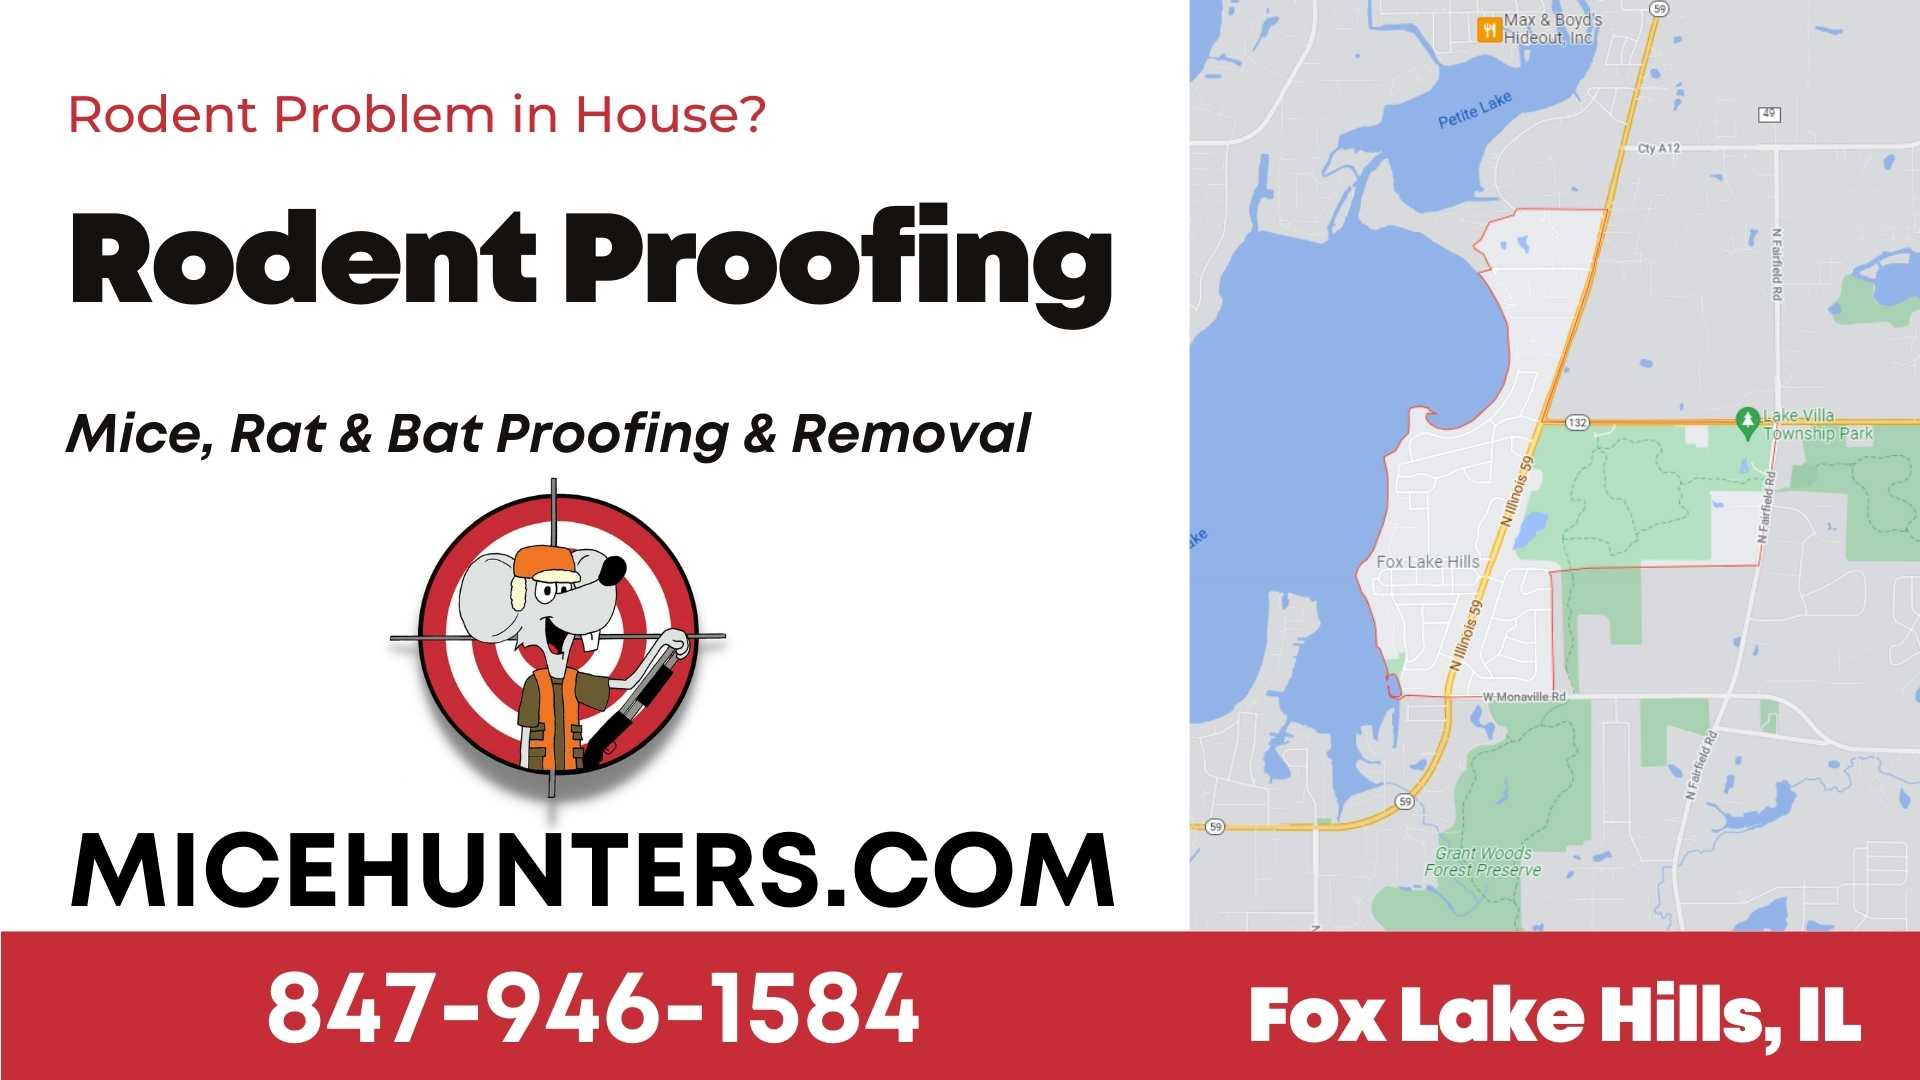 Fox Lake Hills Rodent and Mice Proofing Exterminator near me